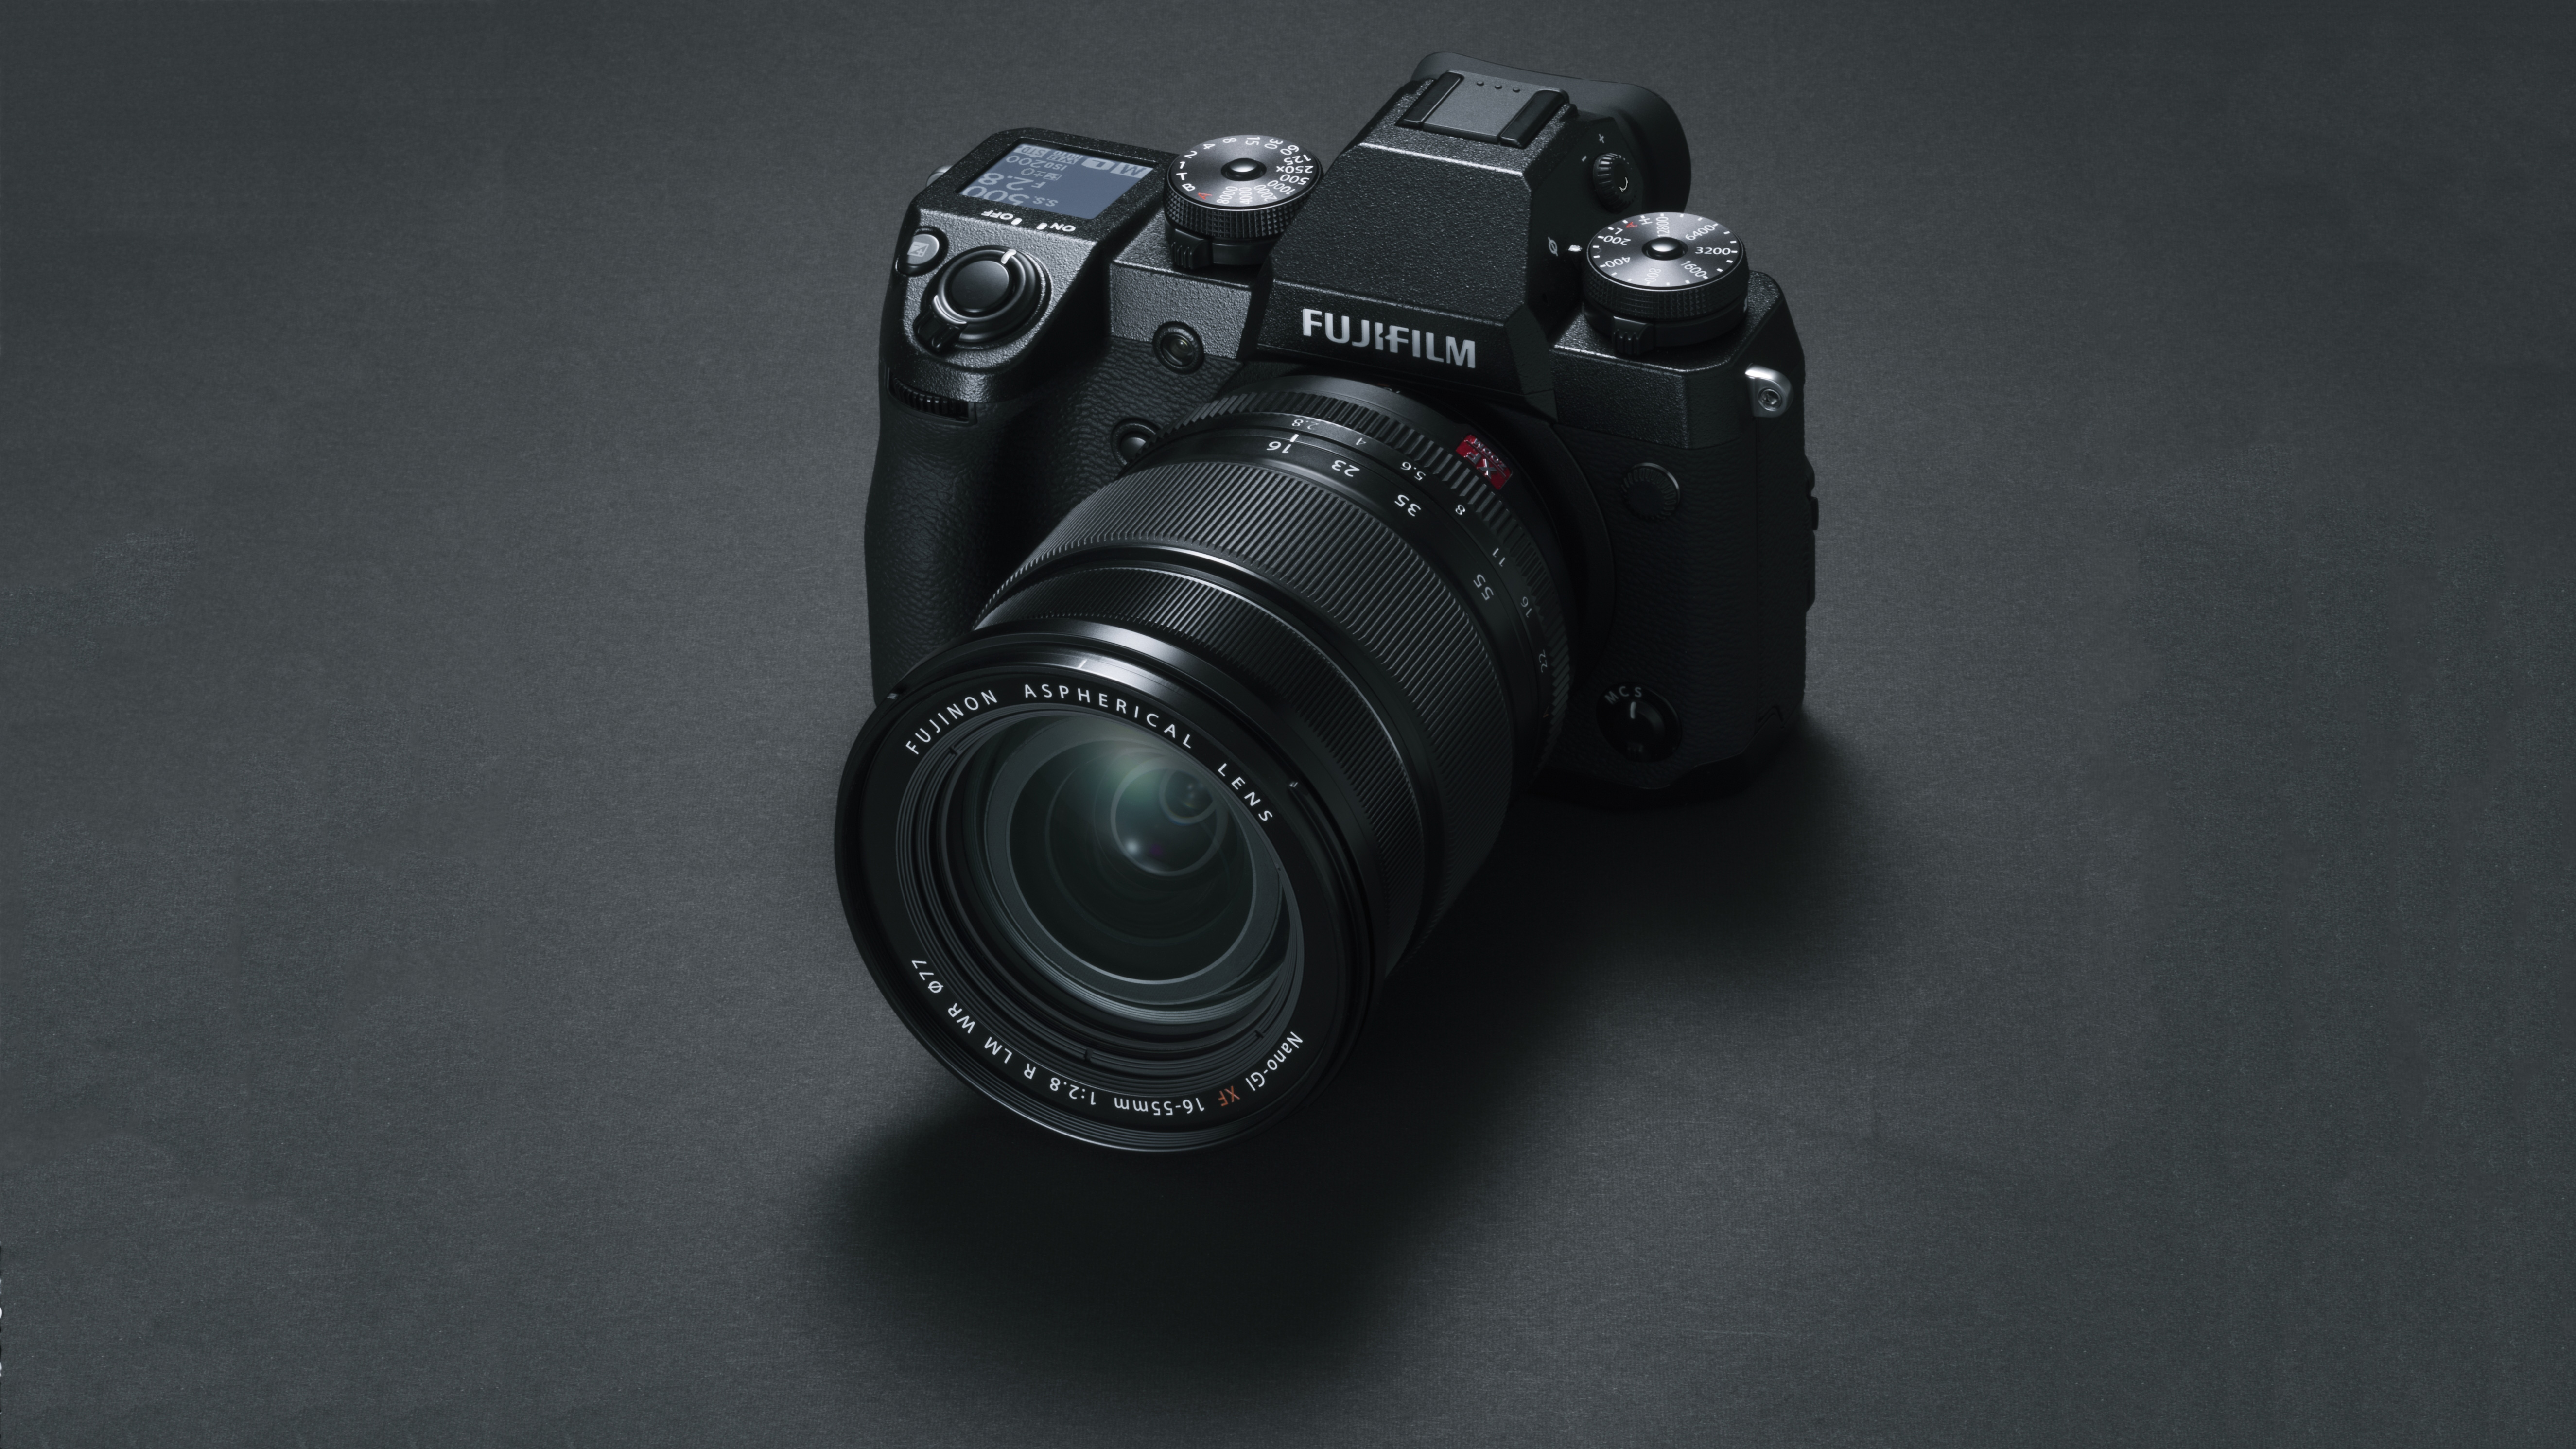 Fujifilm XH2 to arrive in 2022 and it'll be "well worth the wait